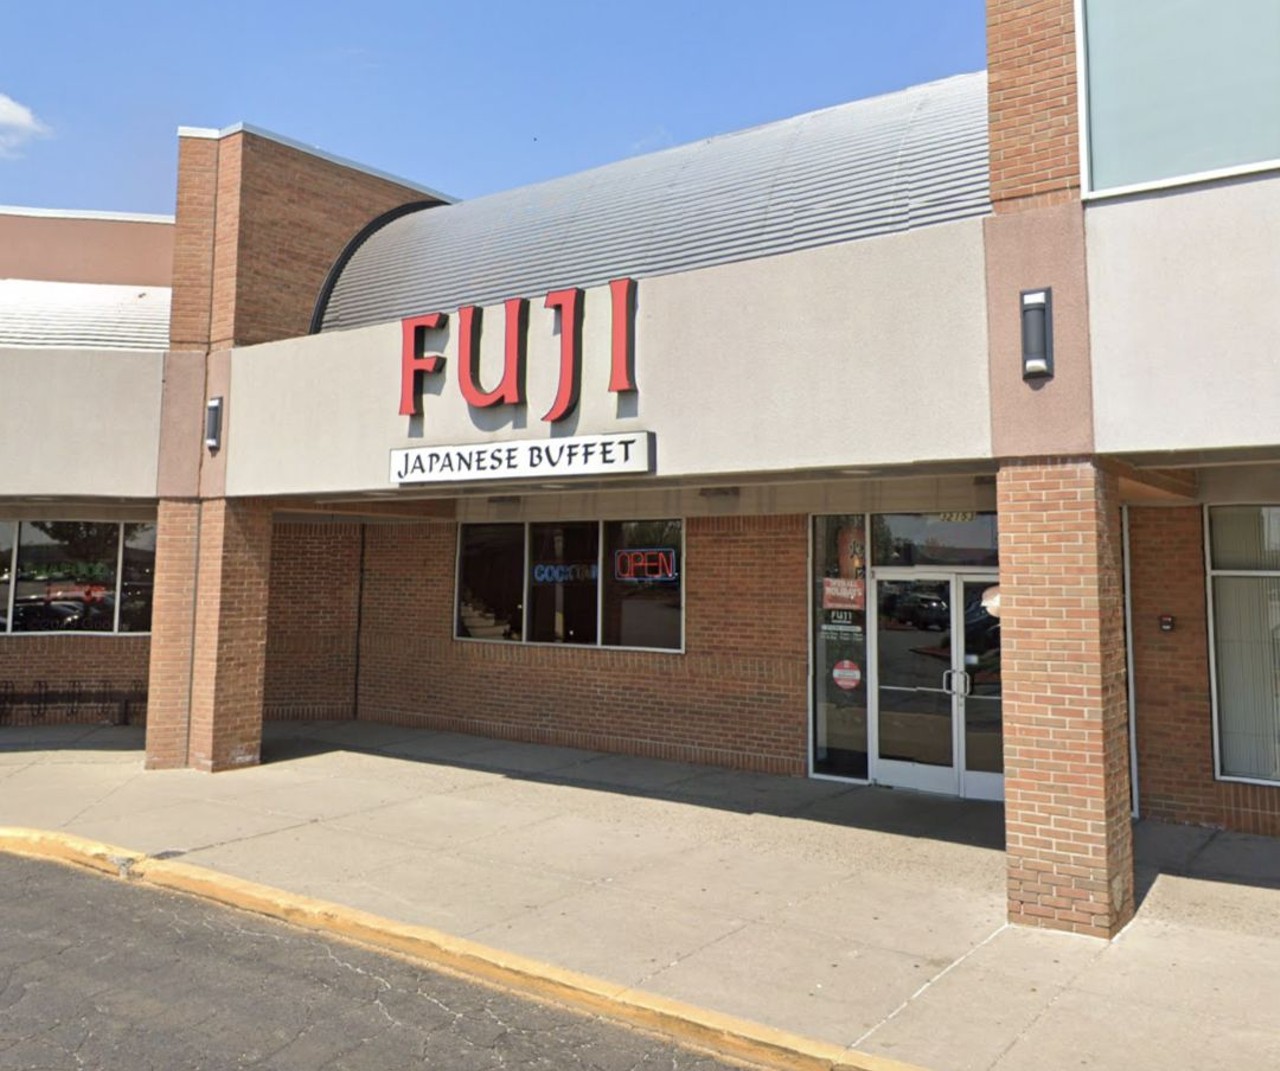 Fuji Japanese Buffet
32153 John R Rd., Madison Heights;  fujibuffet.com
“OK, hear me out. We need more buffets of the caliber that Fuji Buffet is operating under. The geniuses behind the beloved grocery store 168 Asian Mart opened Fuji Buffet in the same strip mall, and my assumption is that they’re using the same produce they’re selling to fill the buffet bins with delicious and  piping hot Asian favorites, and the best sushi section I have ever seen at a buffet since the devastating closure of Tokyo Buffet Lounge in Southfield. It’s similar to what Whole Foods is doing with their hot food bar, except the food is actually good and worth your money. Buffets are often shamed for being more quantity, less quality, but I’m here to vouch for Fuji and begrudgingly yell that it holds it down for both in fear of blowing up the spot, but also secretly hoping someone sees this as the sign they needed to open more high-qual buffets in metro Detroit — especially if they already own a grocery store! Reducing food waste while feeding hungry patrons? Now that’s how to properly get two birds stoned at once.”